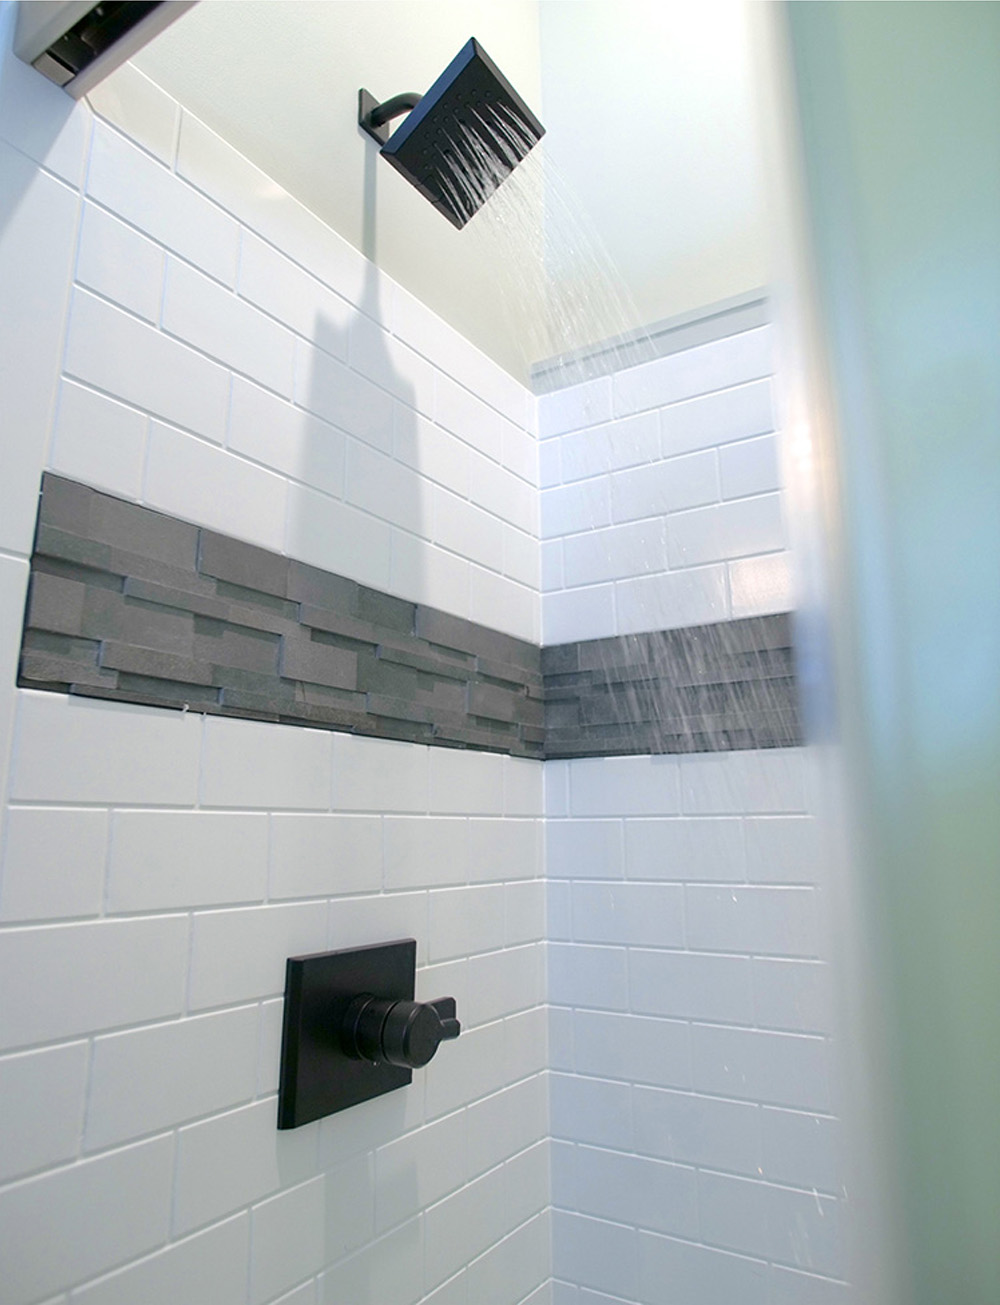 Shower with black shower head and white and grey tile.